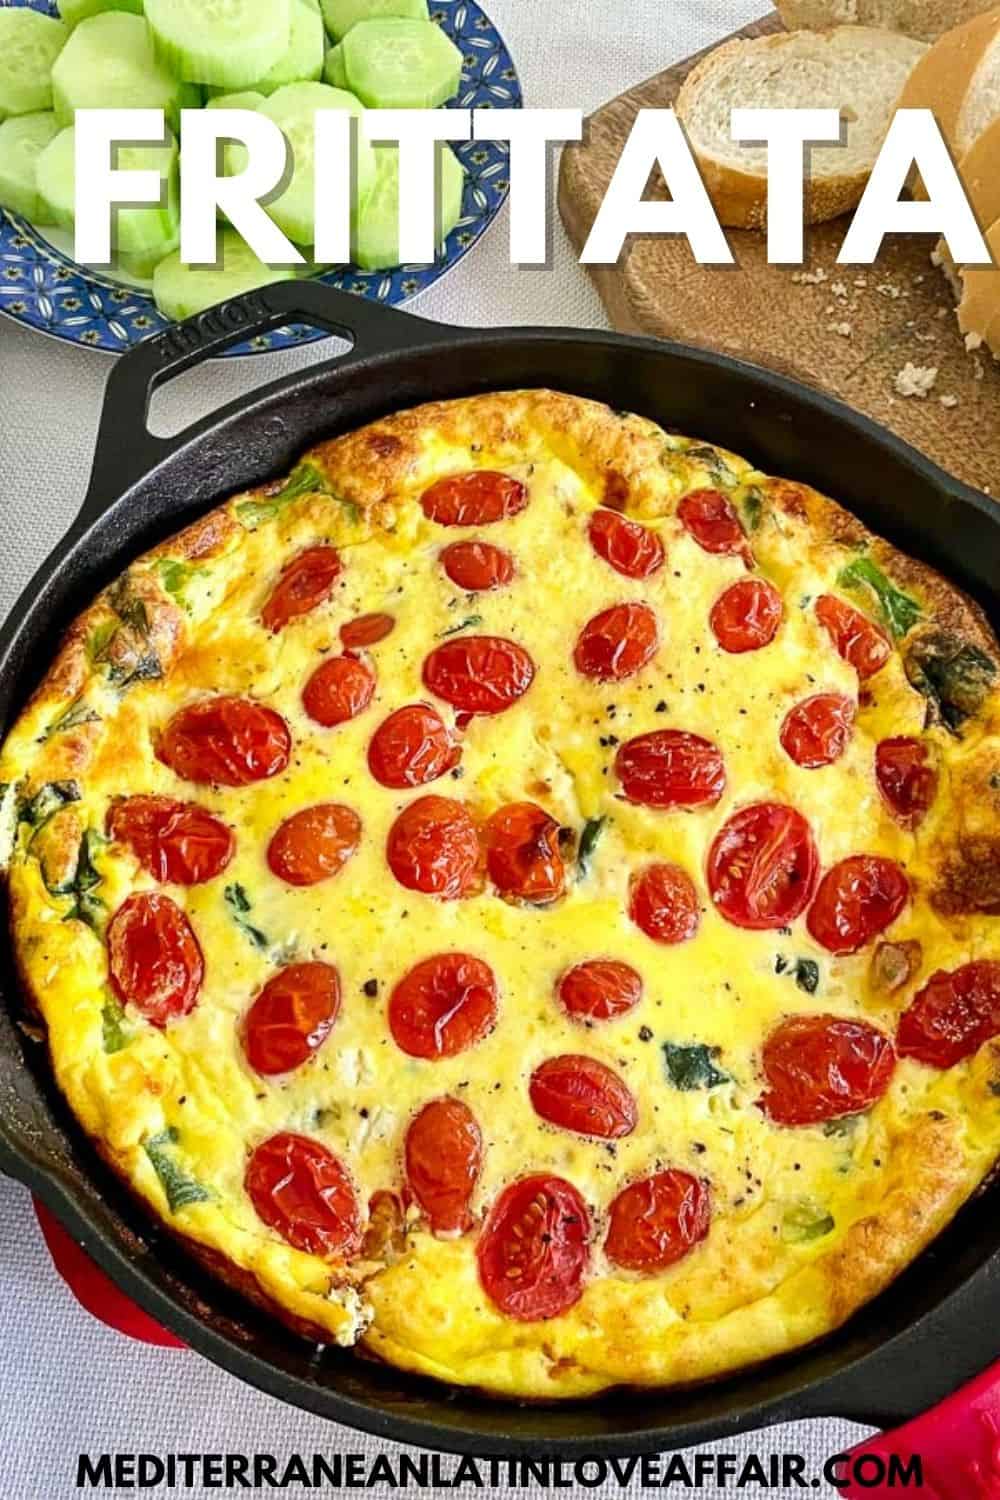 An image prepared for Pinterest. It shows a picture of the frittata in the middle on a cast iron skillet, there's some sliced cucumber and bread on the background. There's a title bar that reads Frittata on top and the website link on the bottom.